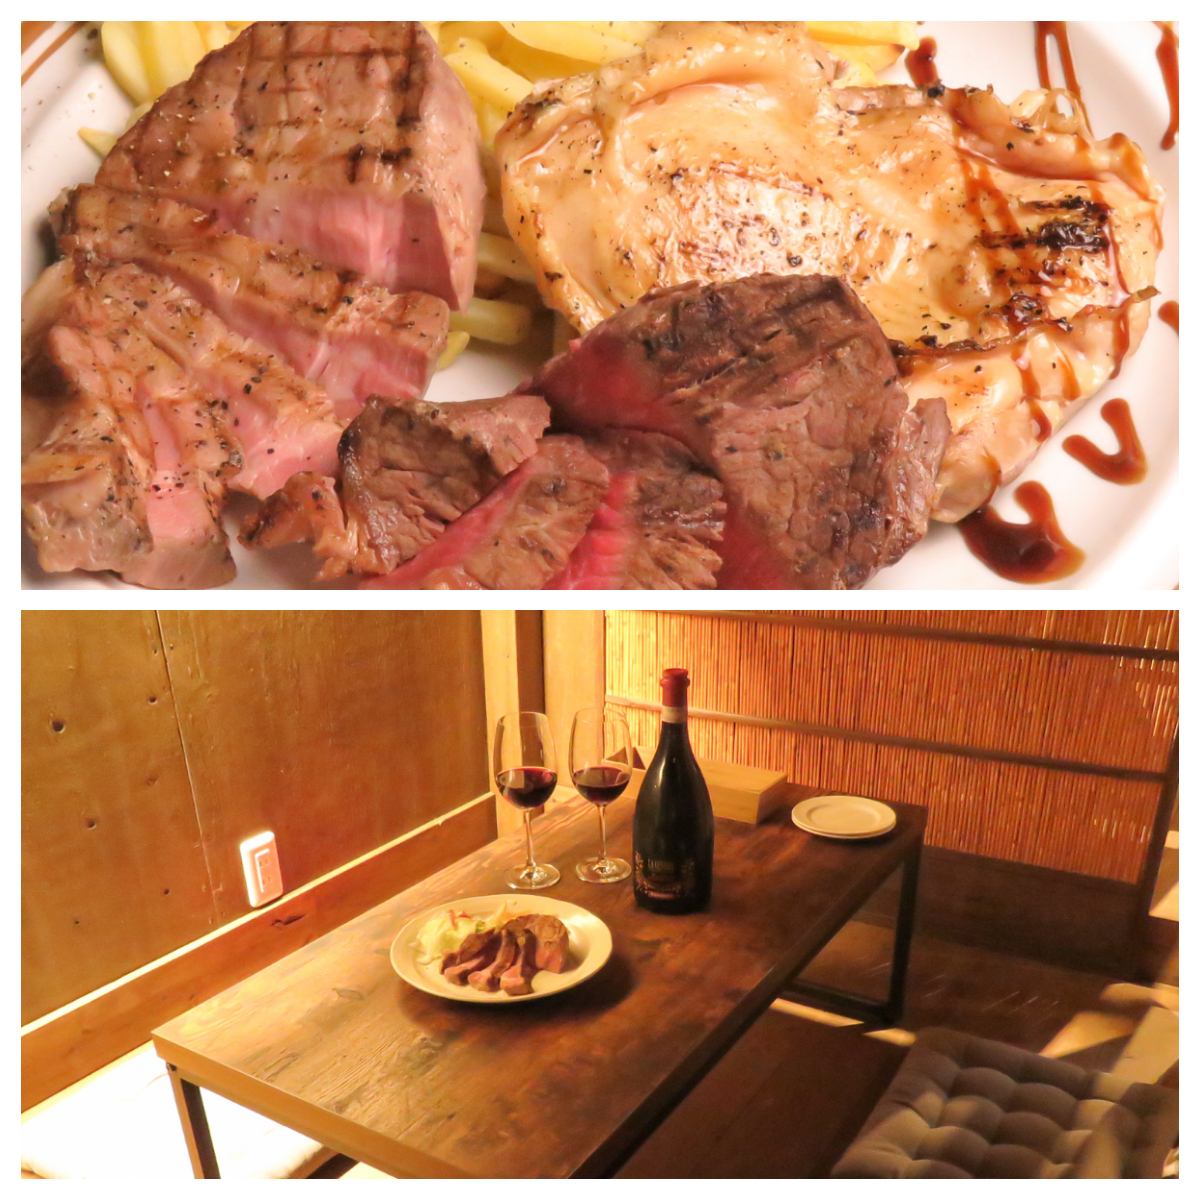 1 minute walk from Kurokawa station! Enjoy luxurious meat in a fashionable space ♪ For anniversaries, birthdays, girls-only gatherings, etc. ☆